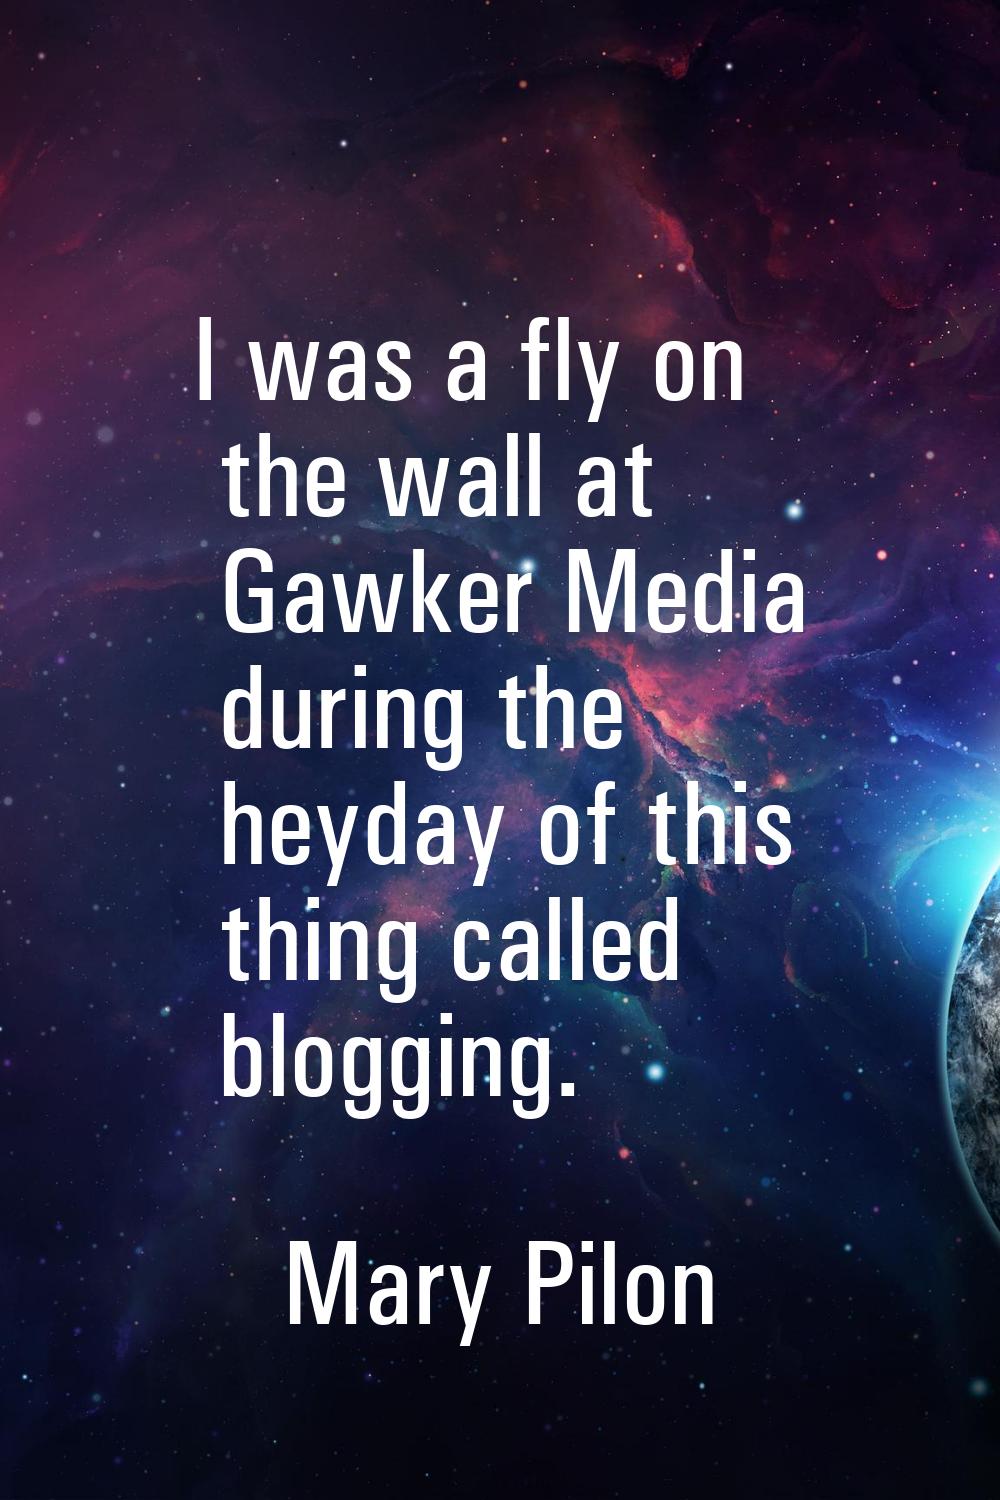 I was a fly on the wall at Gawker Media during the heyday of this thing called blogging.